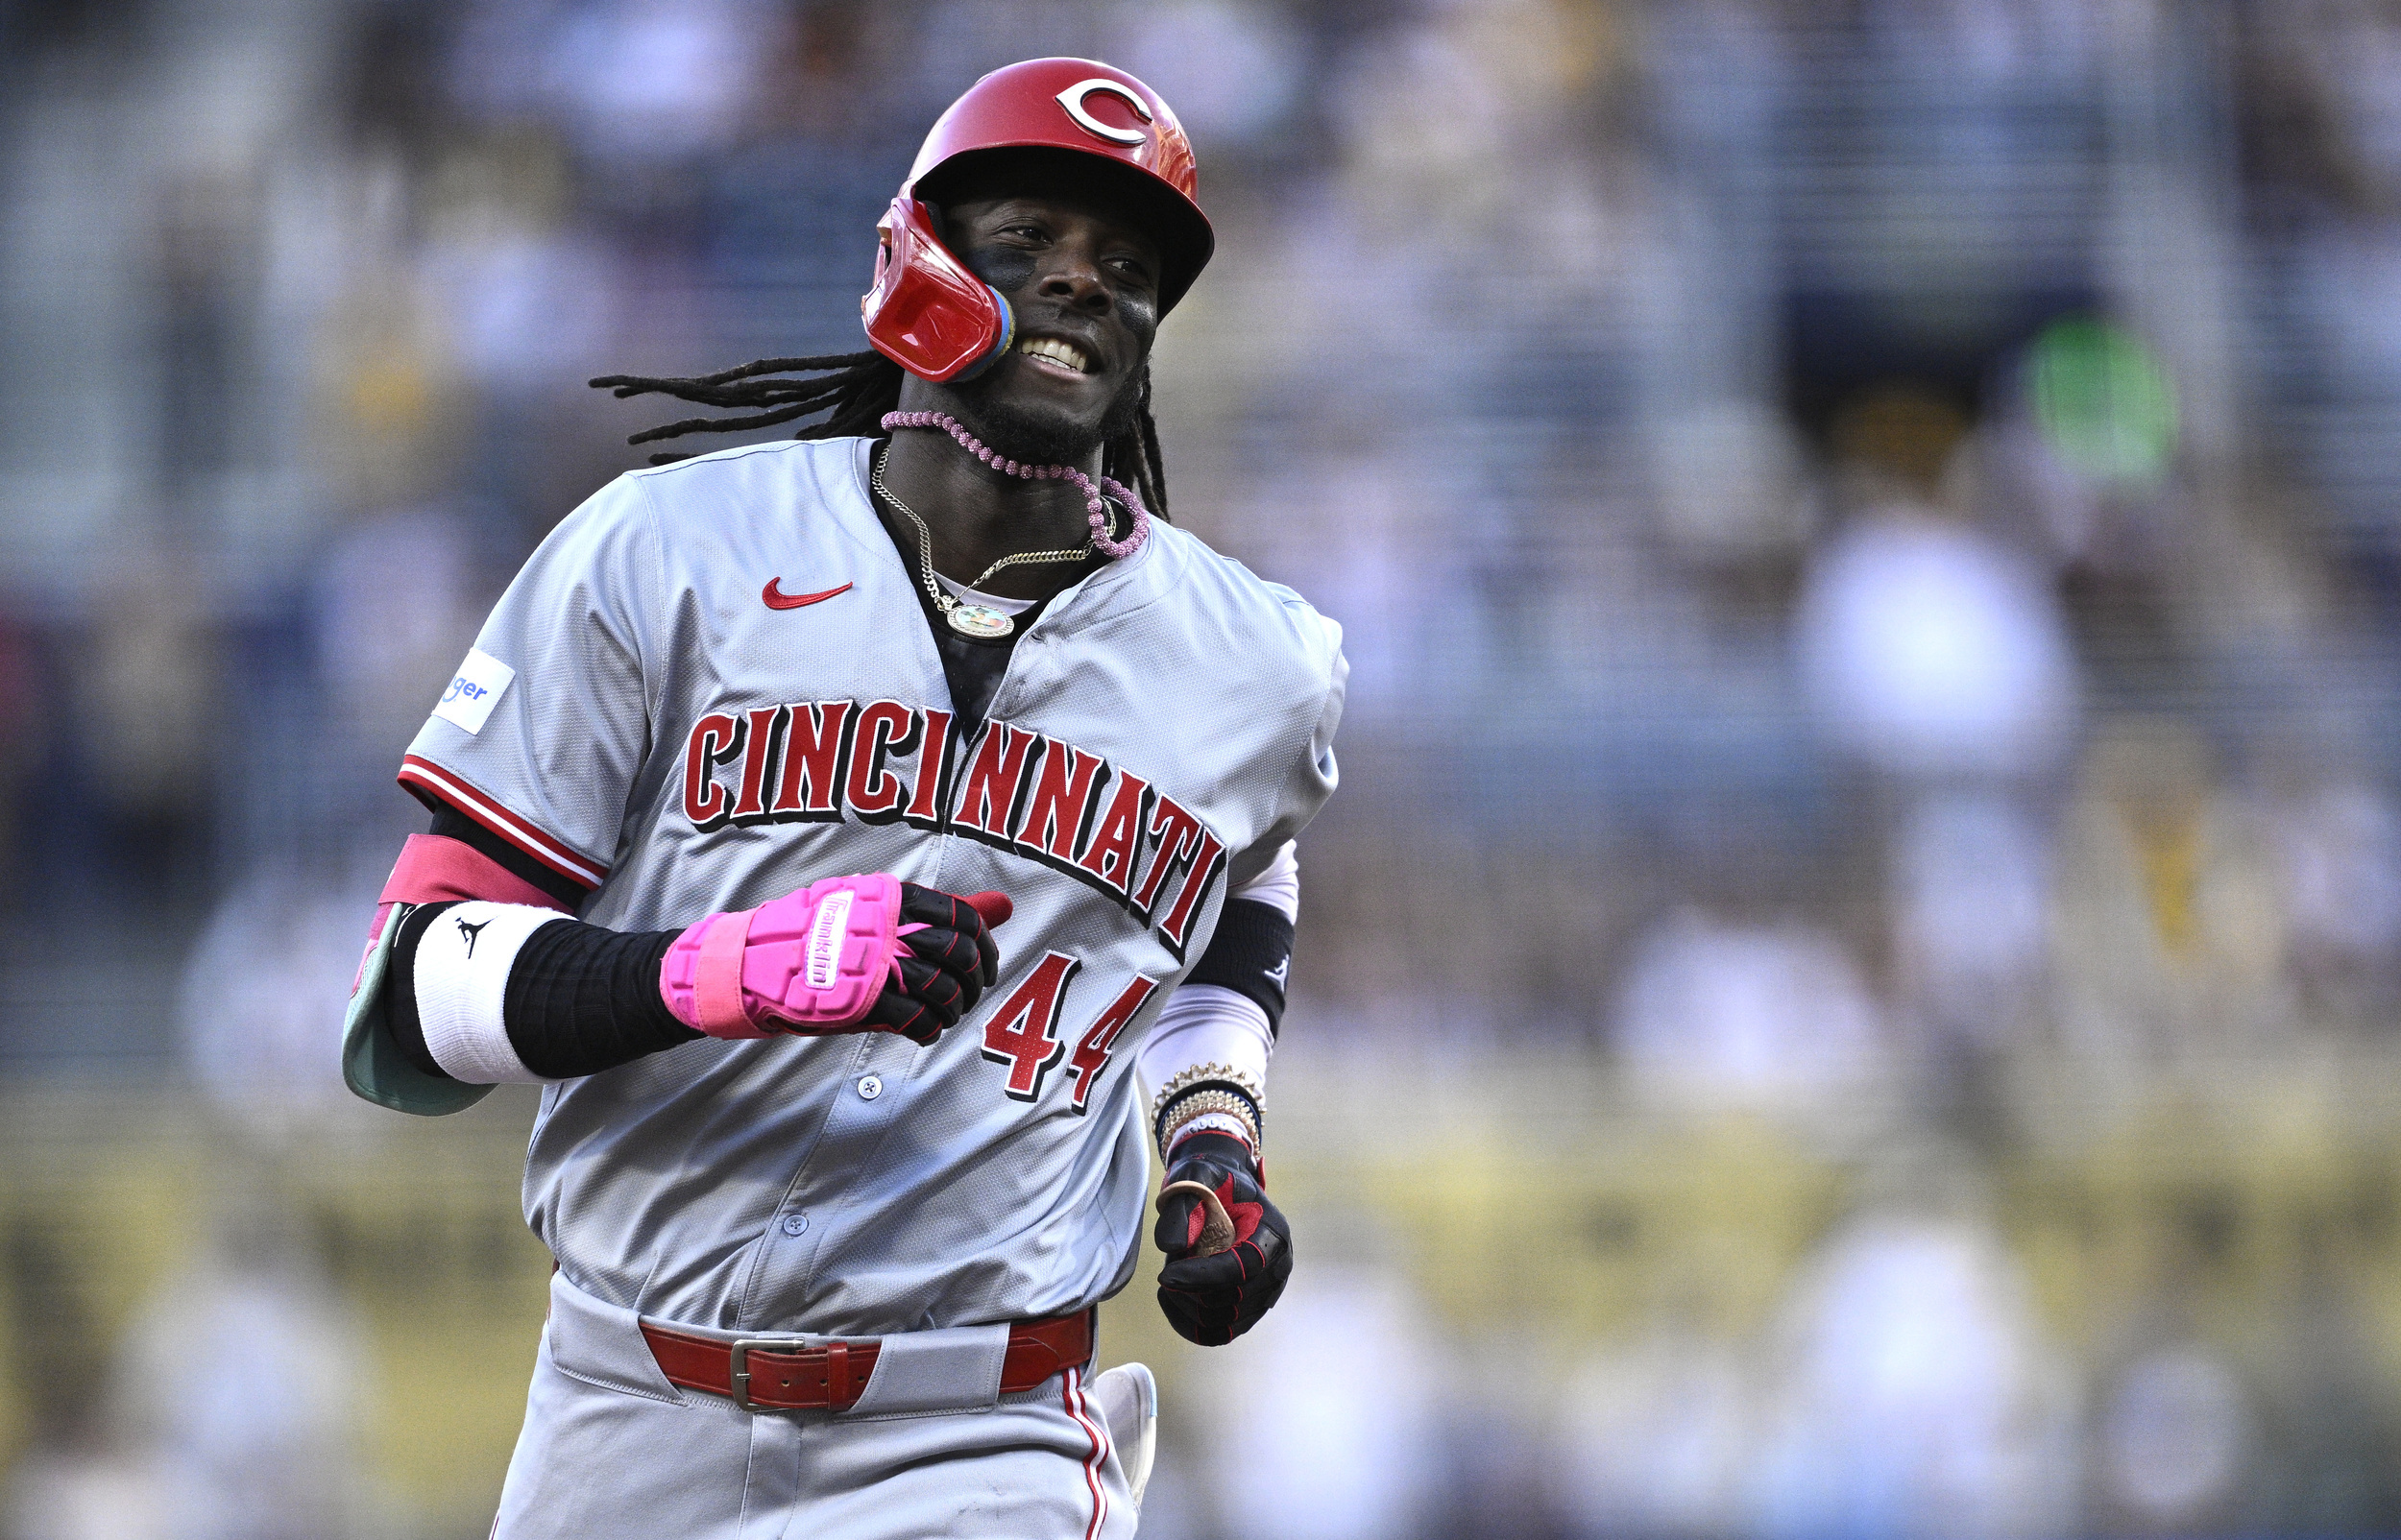 electric shortstop accomplishes something not done since deion sanders